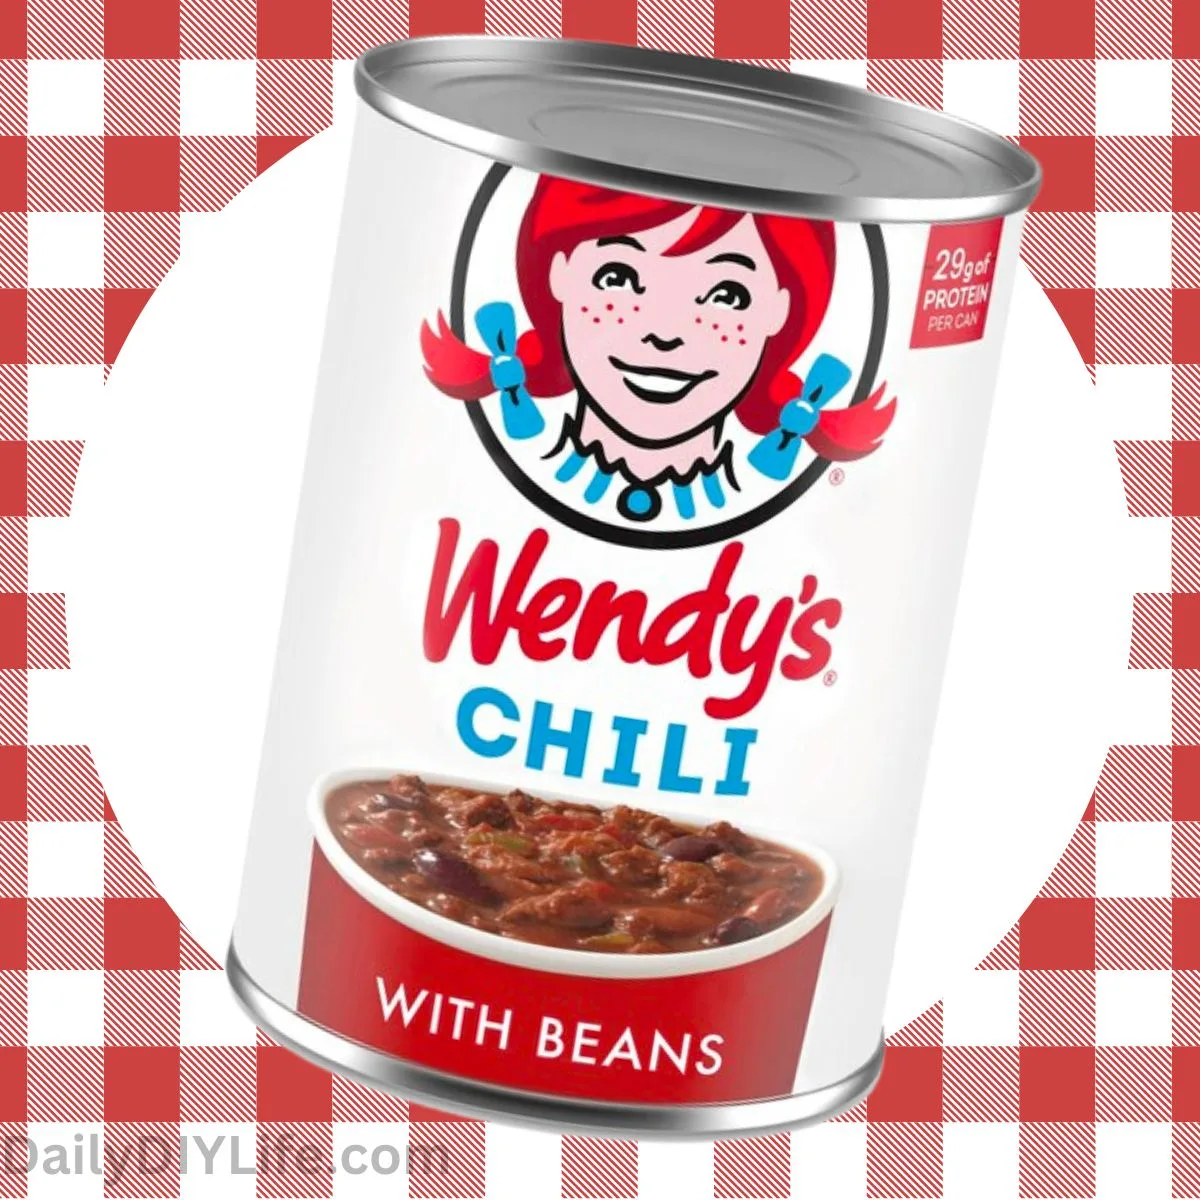 can of wendy's chili on a checked background